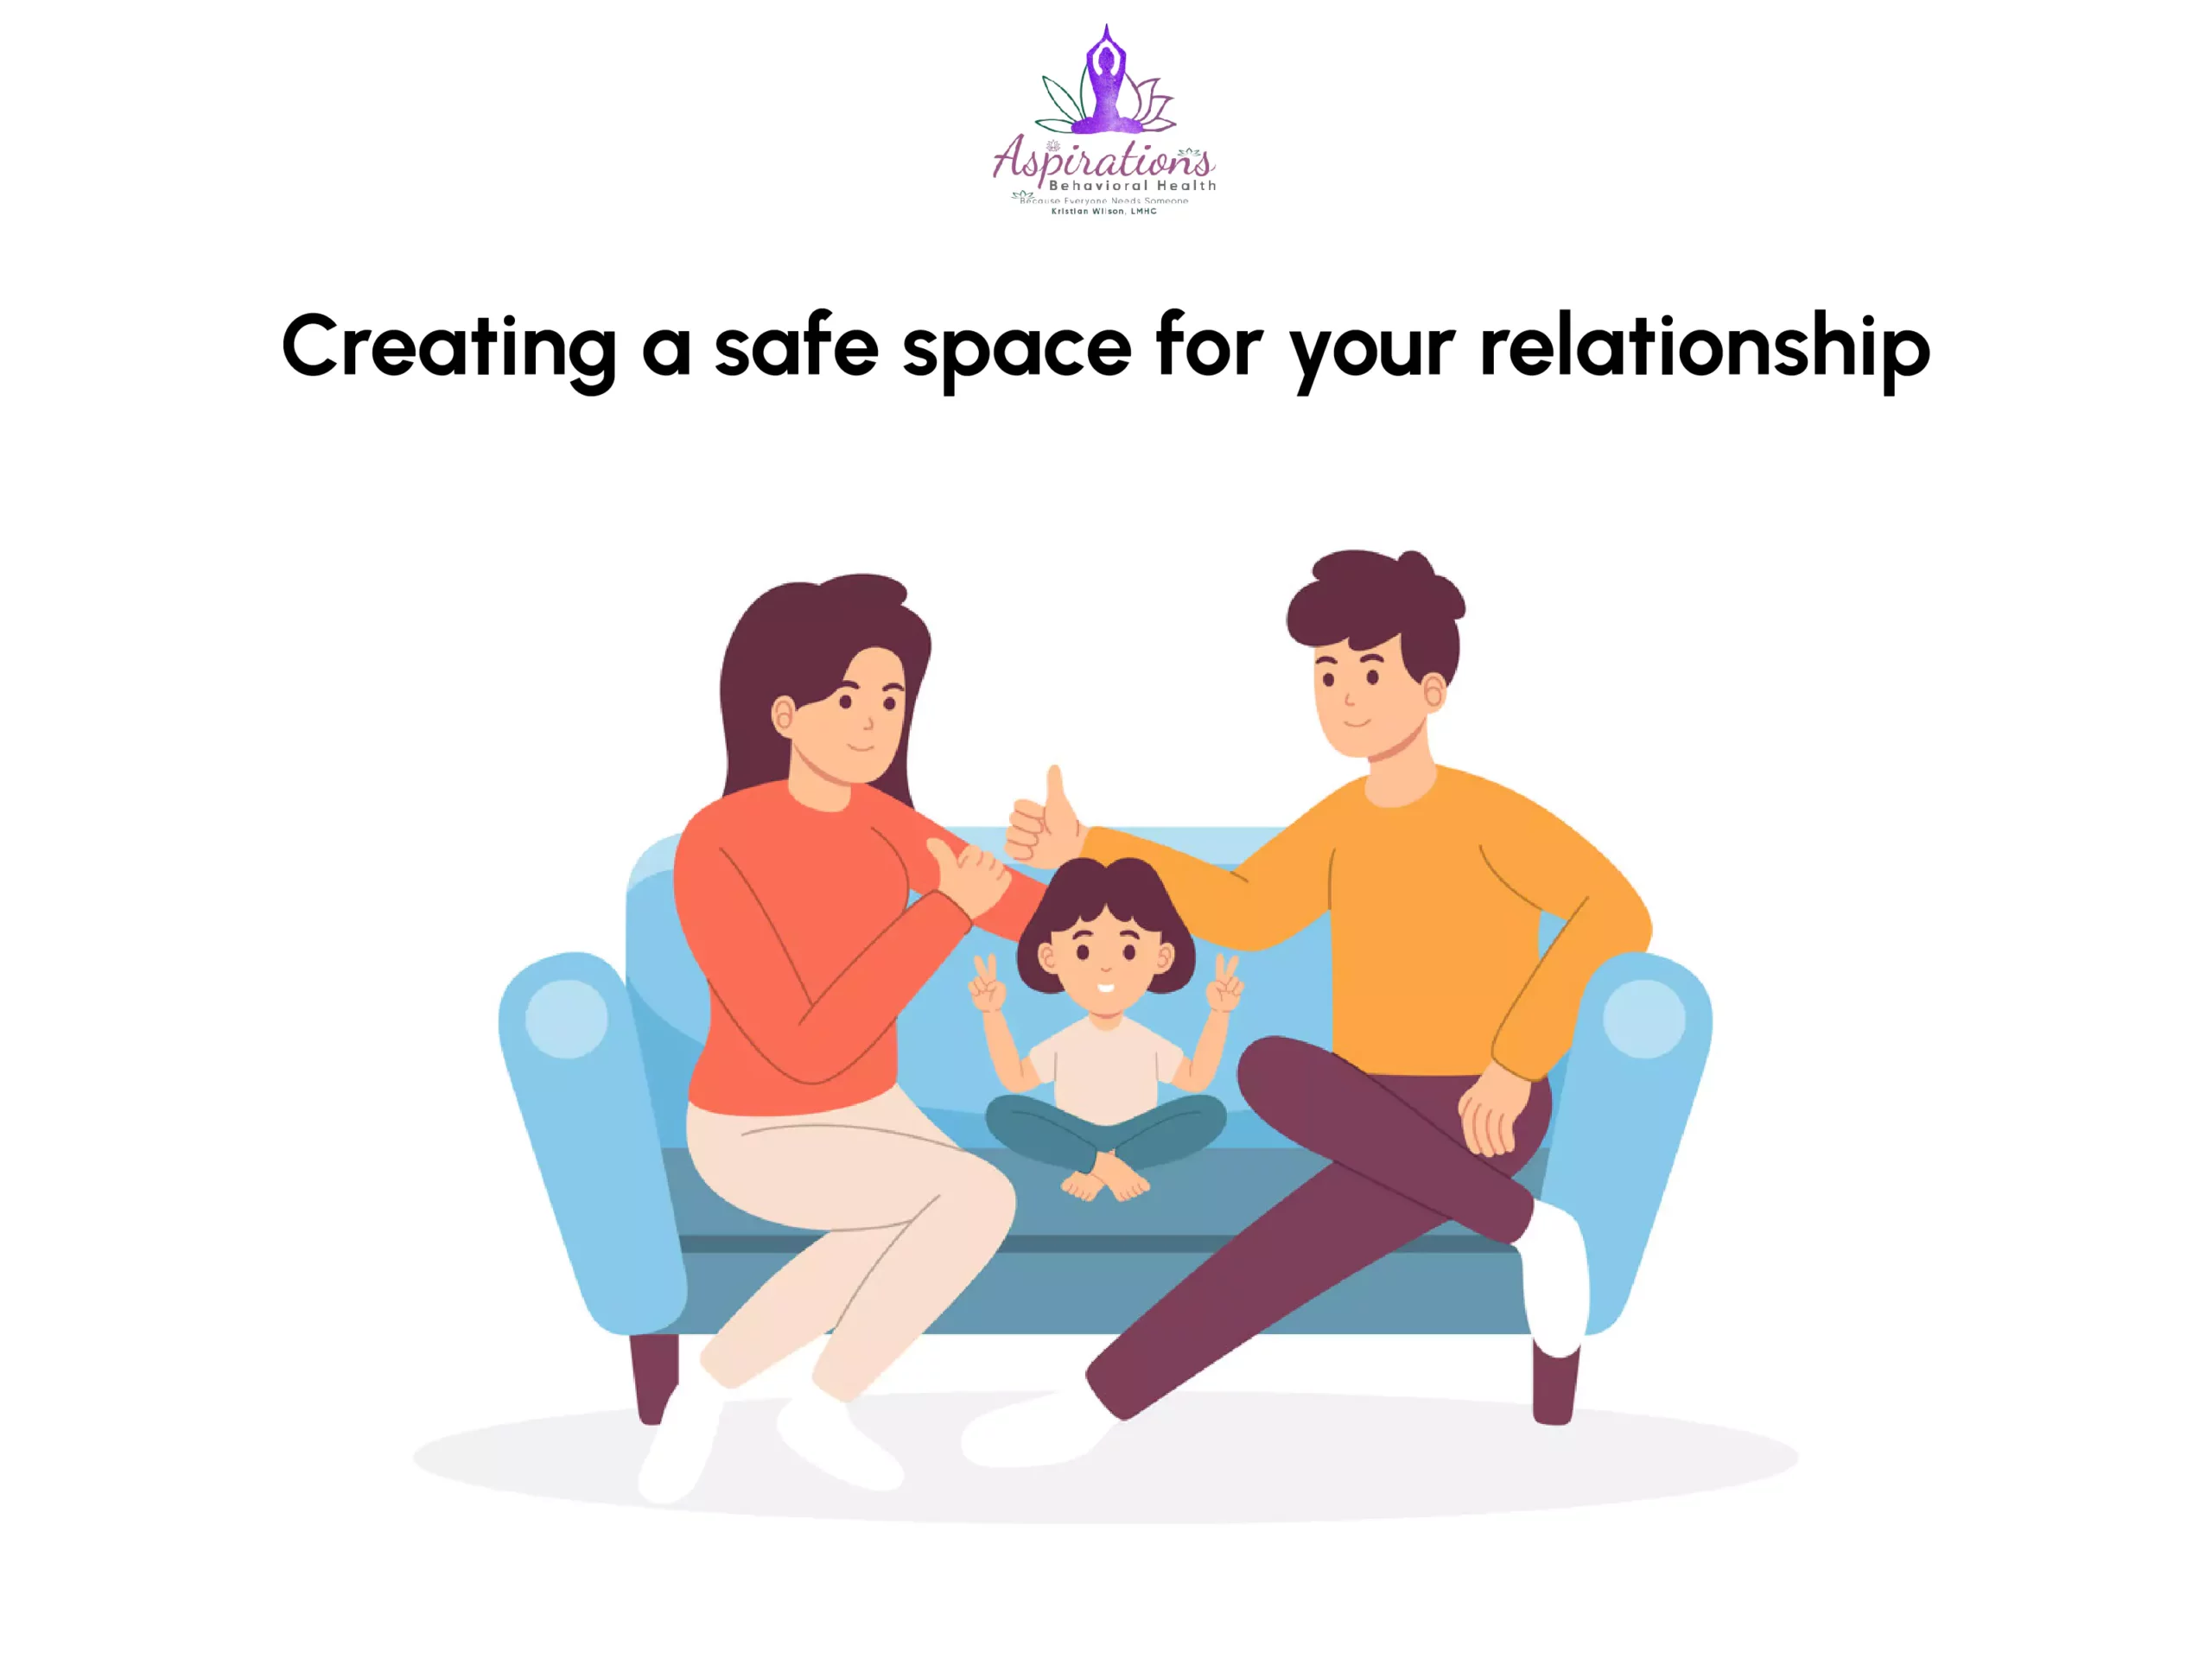 Creating a safe space for your relationship